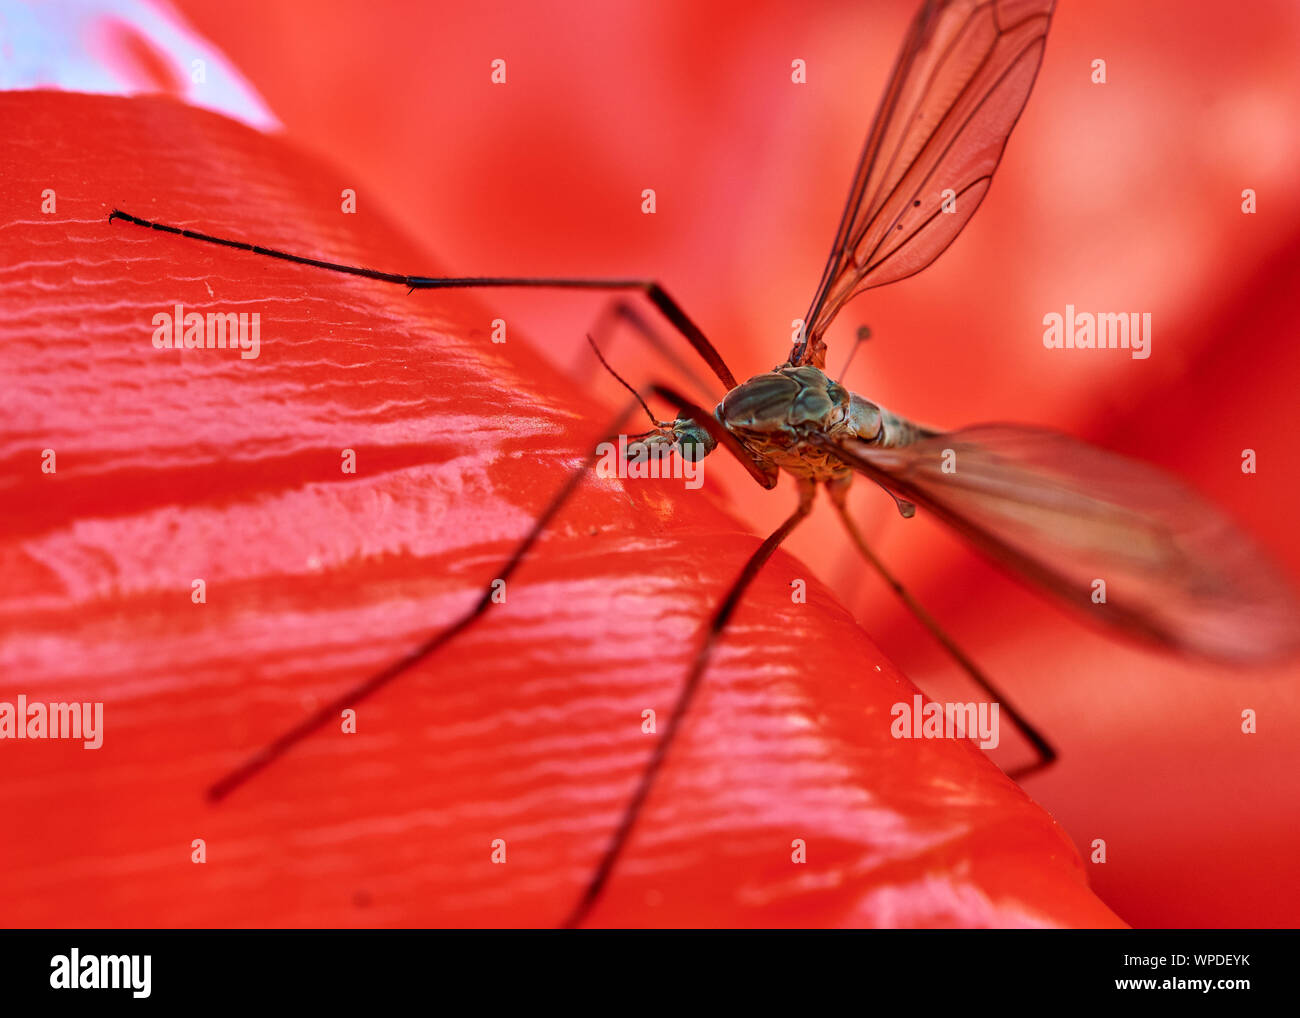 Spindly crane fly (Tipulidae) insect perched on a bright red outdoor toy inflatable. Stock Photo